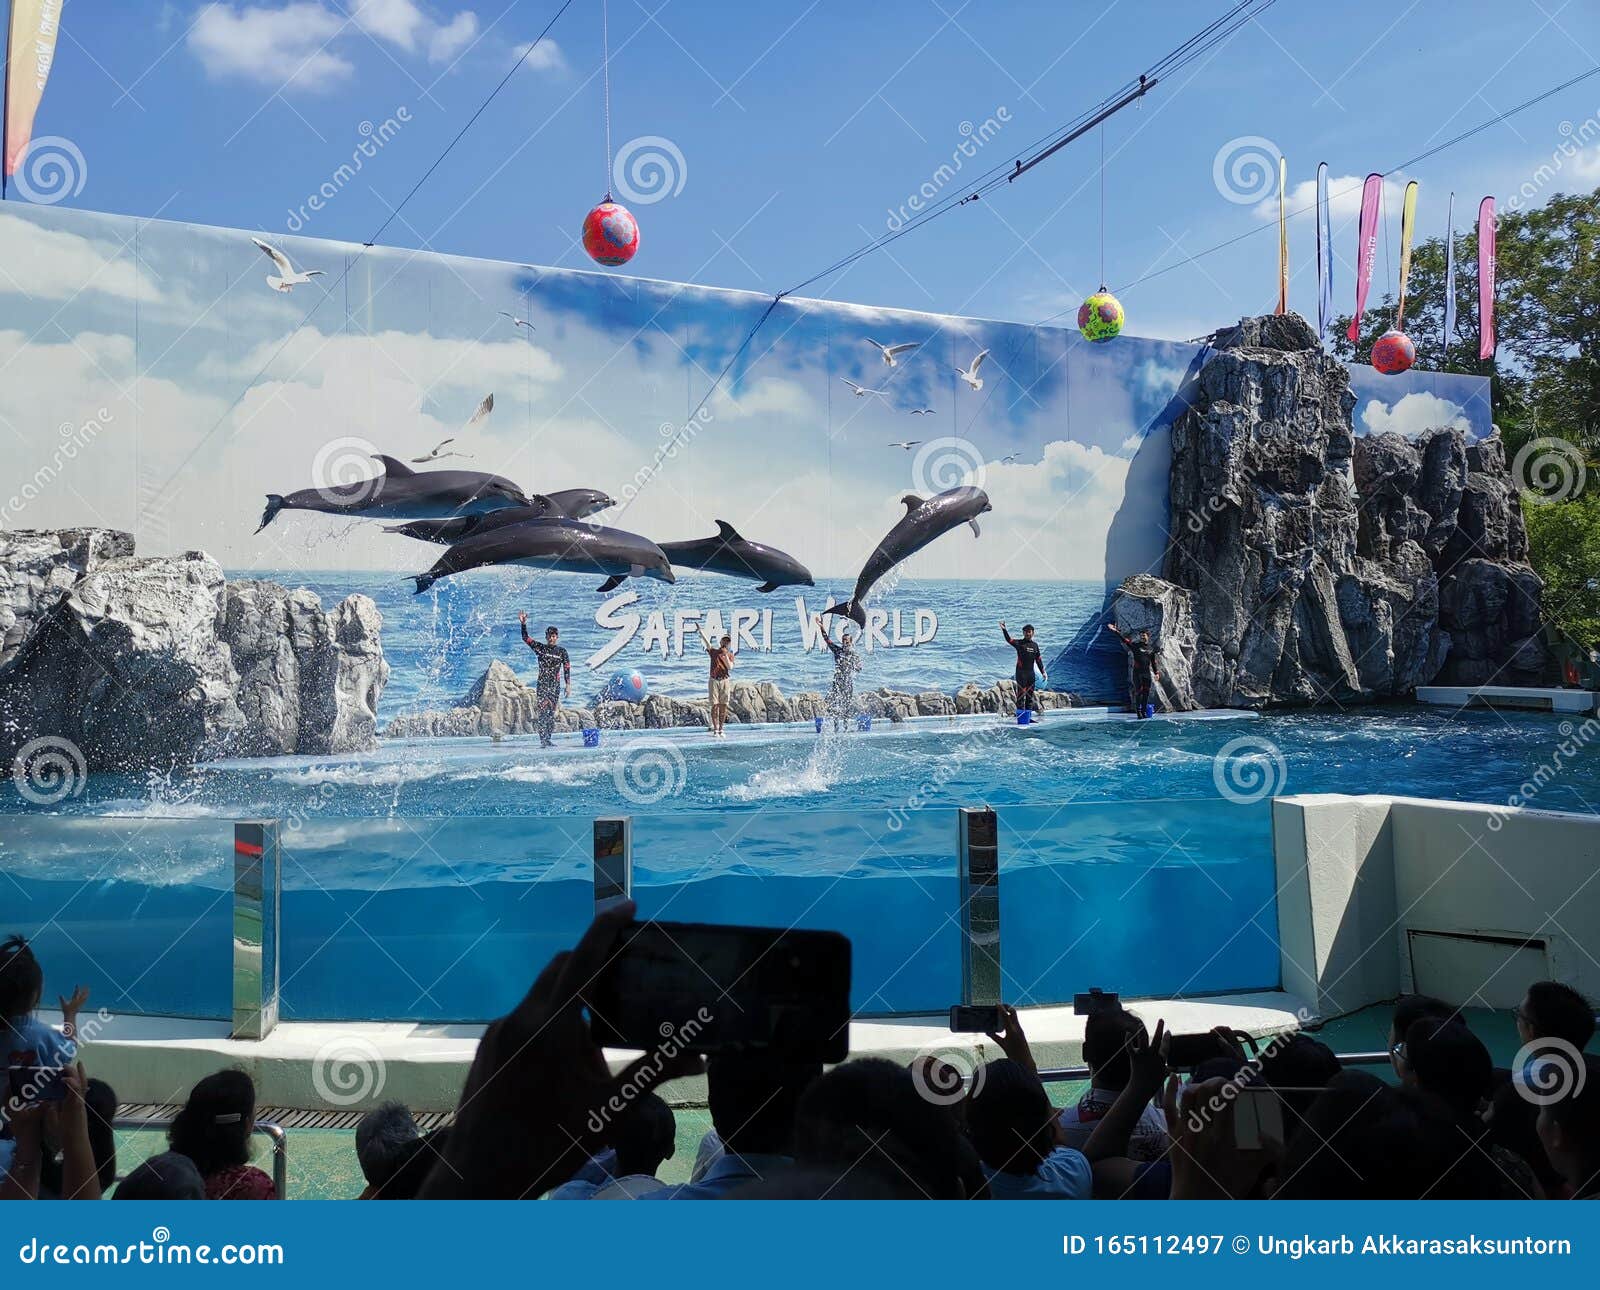 A Loma Show in a Big Pool at Safari World & X28;an Open Air Zoo in ...